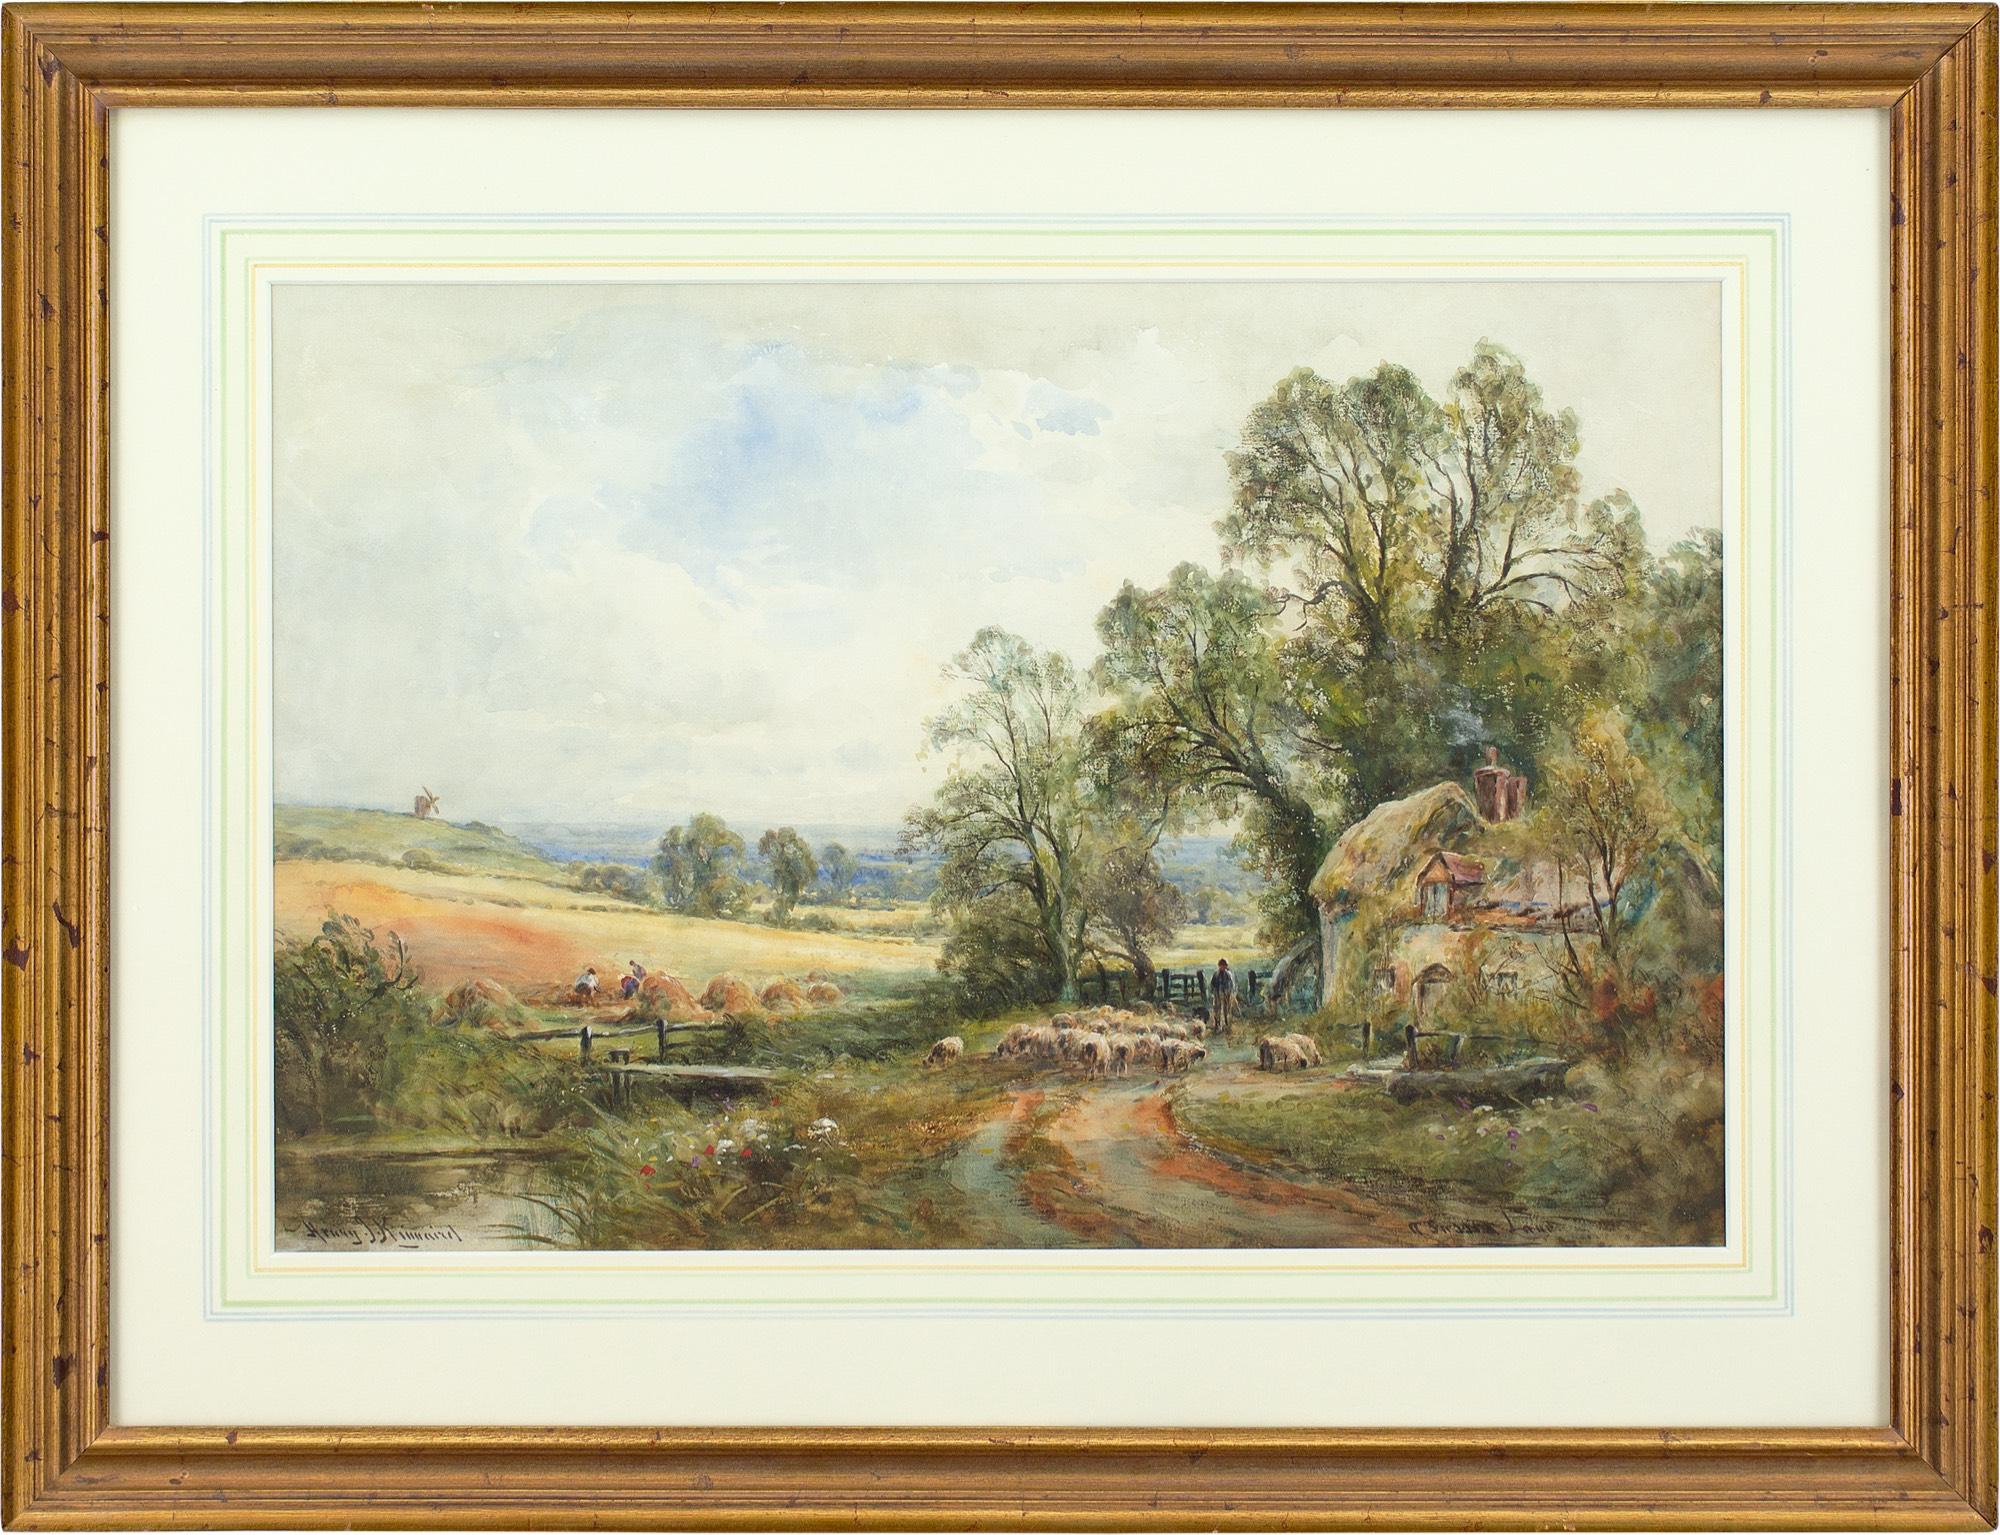 This early 20th-century oil painting by British artist Henry John Kinnaird (1880-1920) depicts a quaint pastoral scene in Sussex, England.

Tranquillity, harmony and abundant beauty - it’s all here in the heart of the English countryside. Sheep